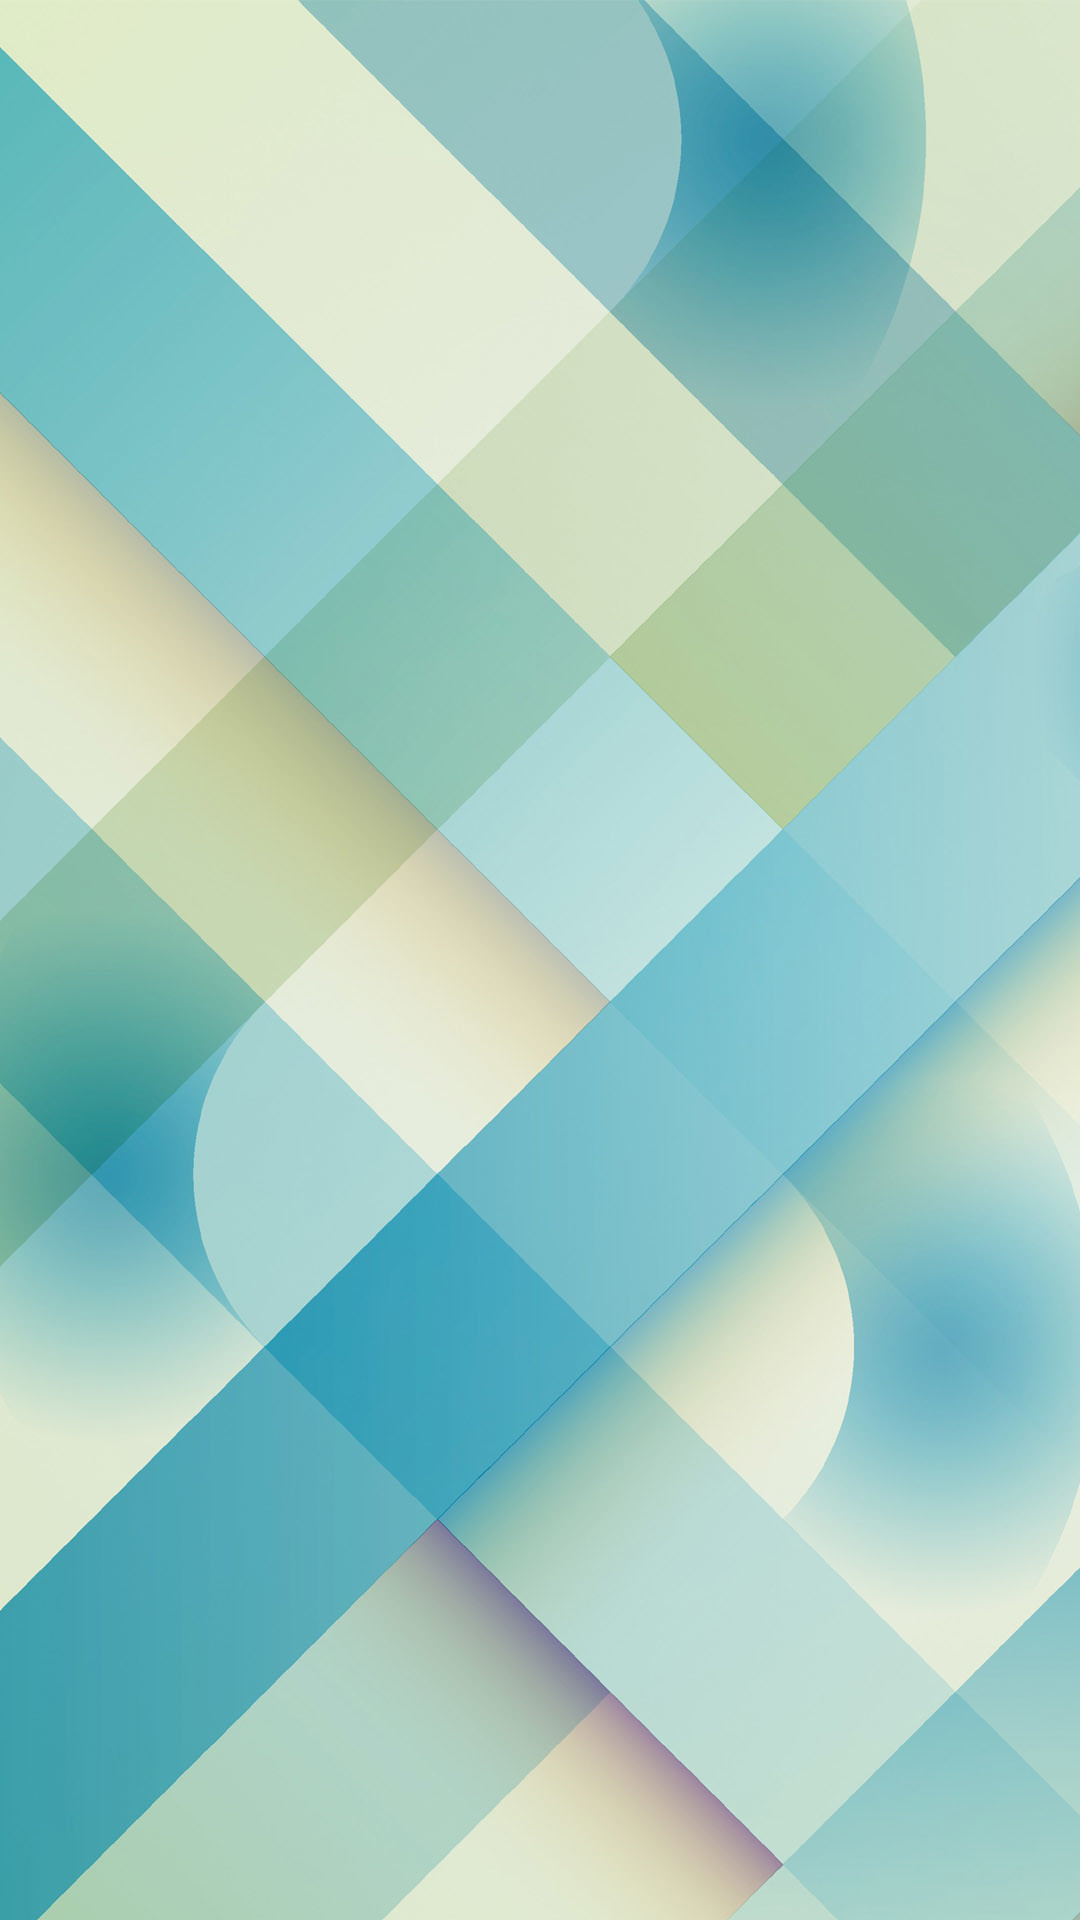 1080x1920 Nexus 5 Android 4.4 KitKat Default Light Blue Shapes Android Wallpaper .